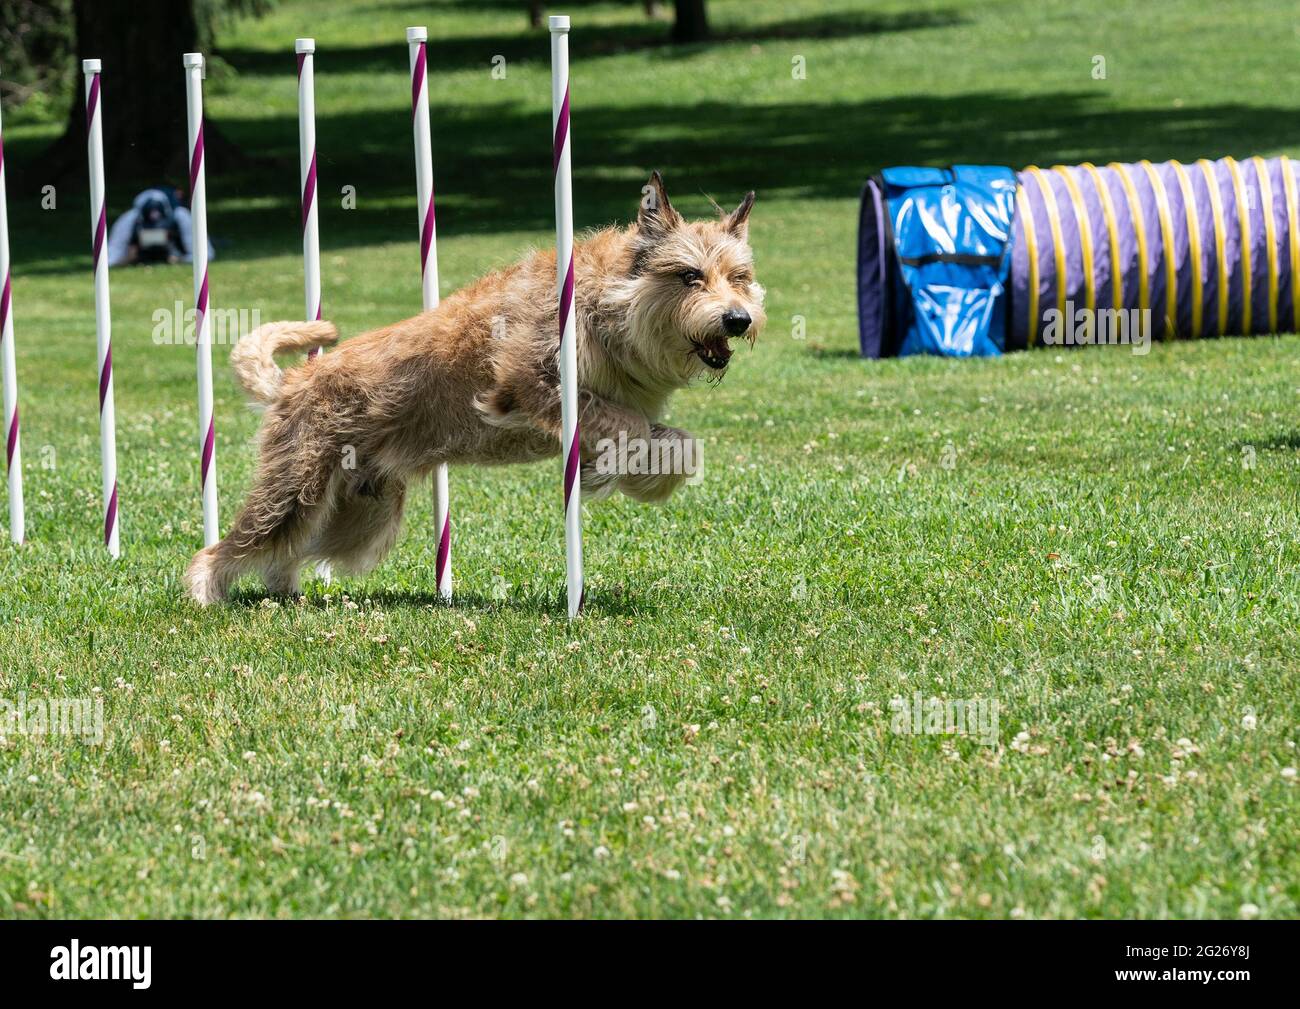 Tarrytown, United States. 08th June, 2021. Berger Picard named Chester runs through the agility course during demonstration at 145th Annual Westminster Kennel Club Dog Show Press Preview at Lyndhurst Estate in Tarrytown. Annual Westminster Kennel Club Dog Show was canceled in 2020 because of COVID-19 pandemic and moved this year to open space at Lyndhurst Estate outside of New York City. During press preview 4 new breeds were introduced as well as demonstration on agility and obedience. (Photo by Lev Radin/Pacific Press) Credit: Pacific Press Media Production Corp./Alamy Live News Stock Photo